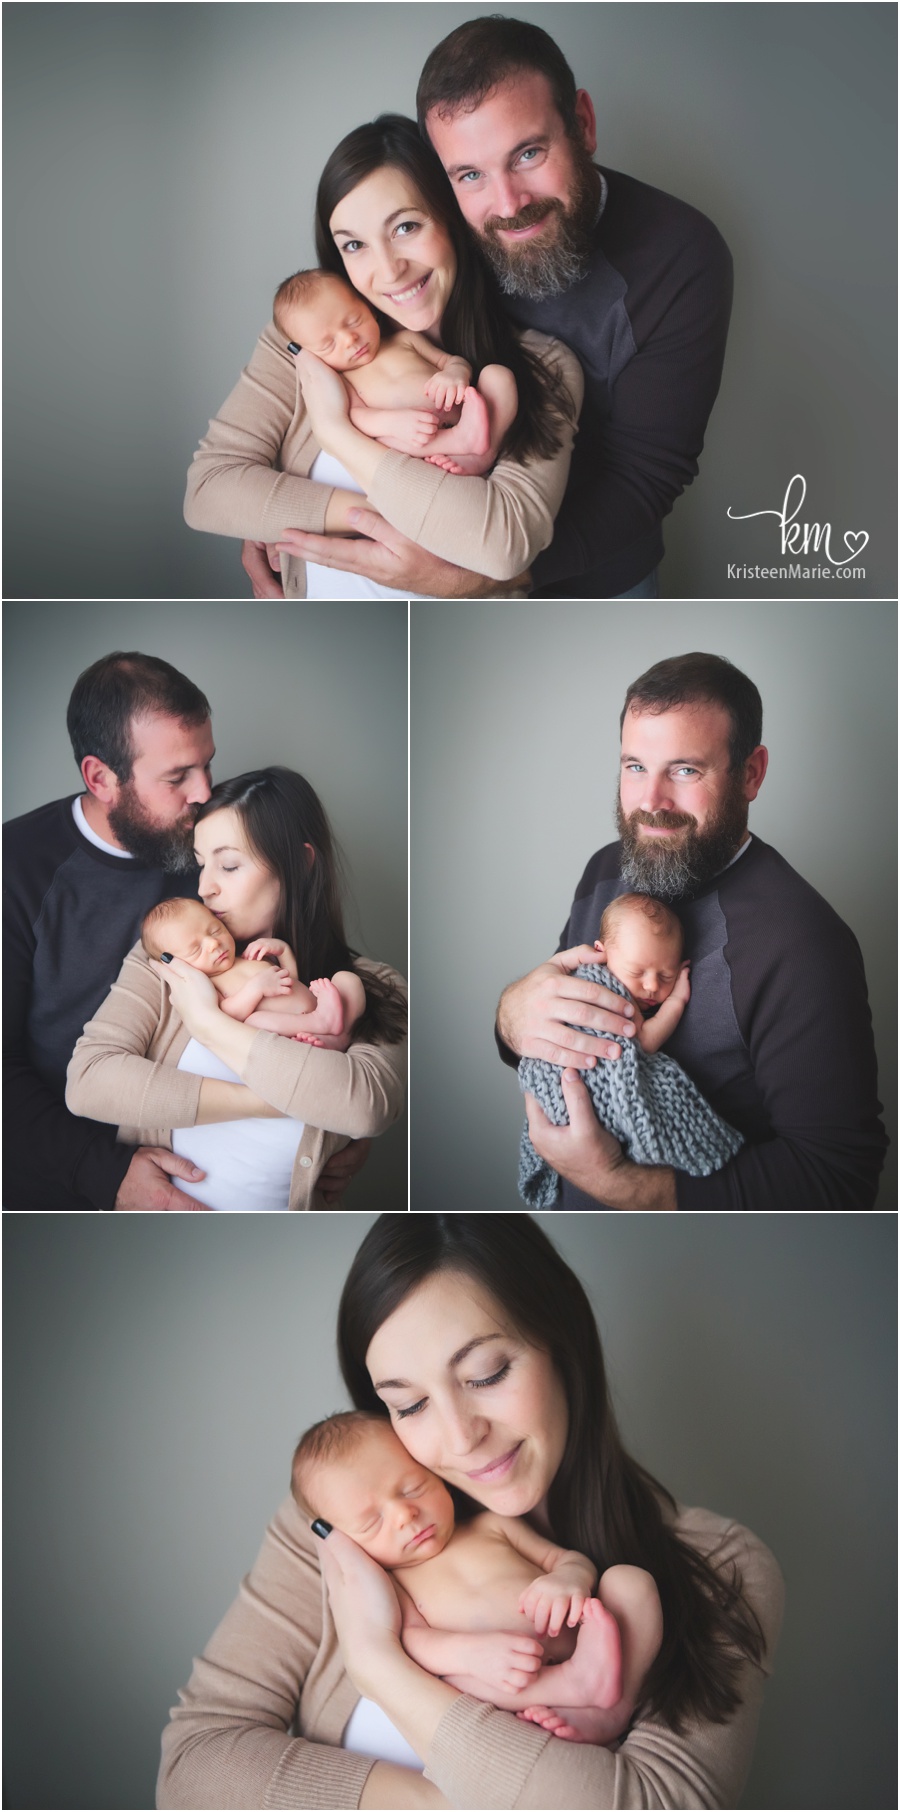 family photography poses with newborn baby - Family from Noblesville, IN